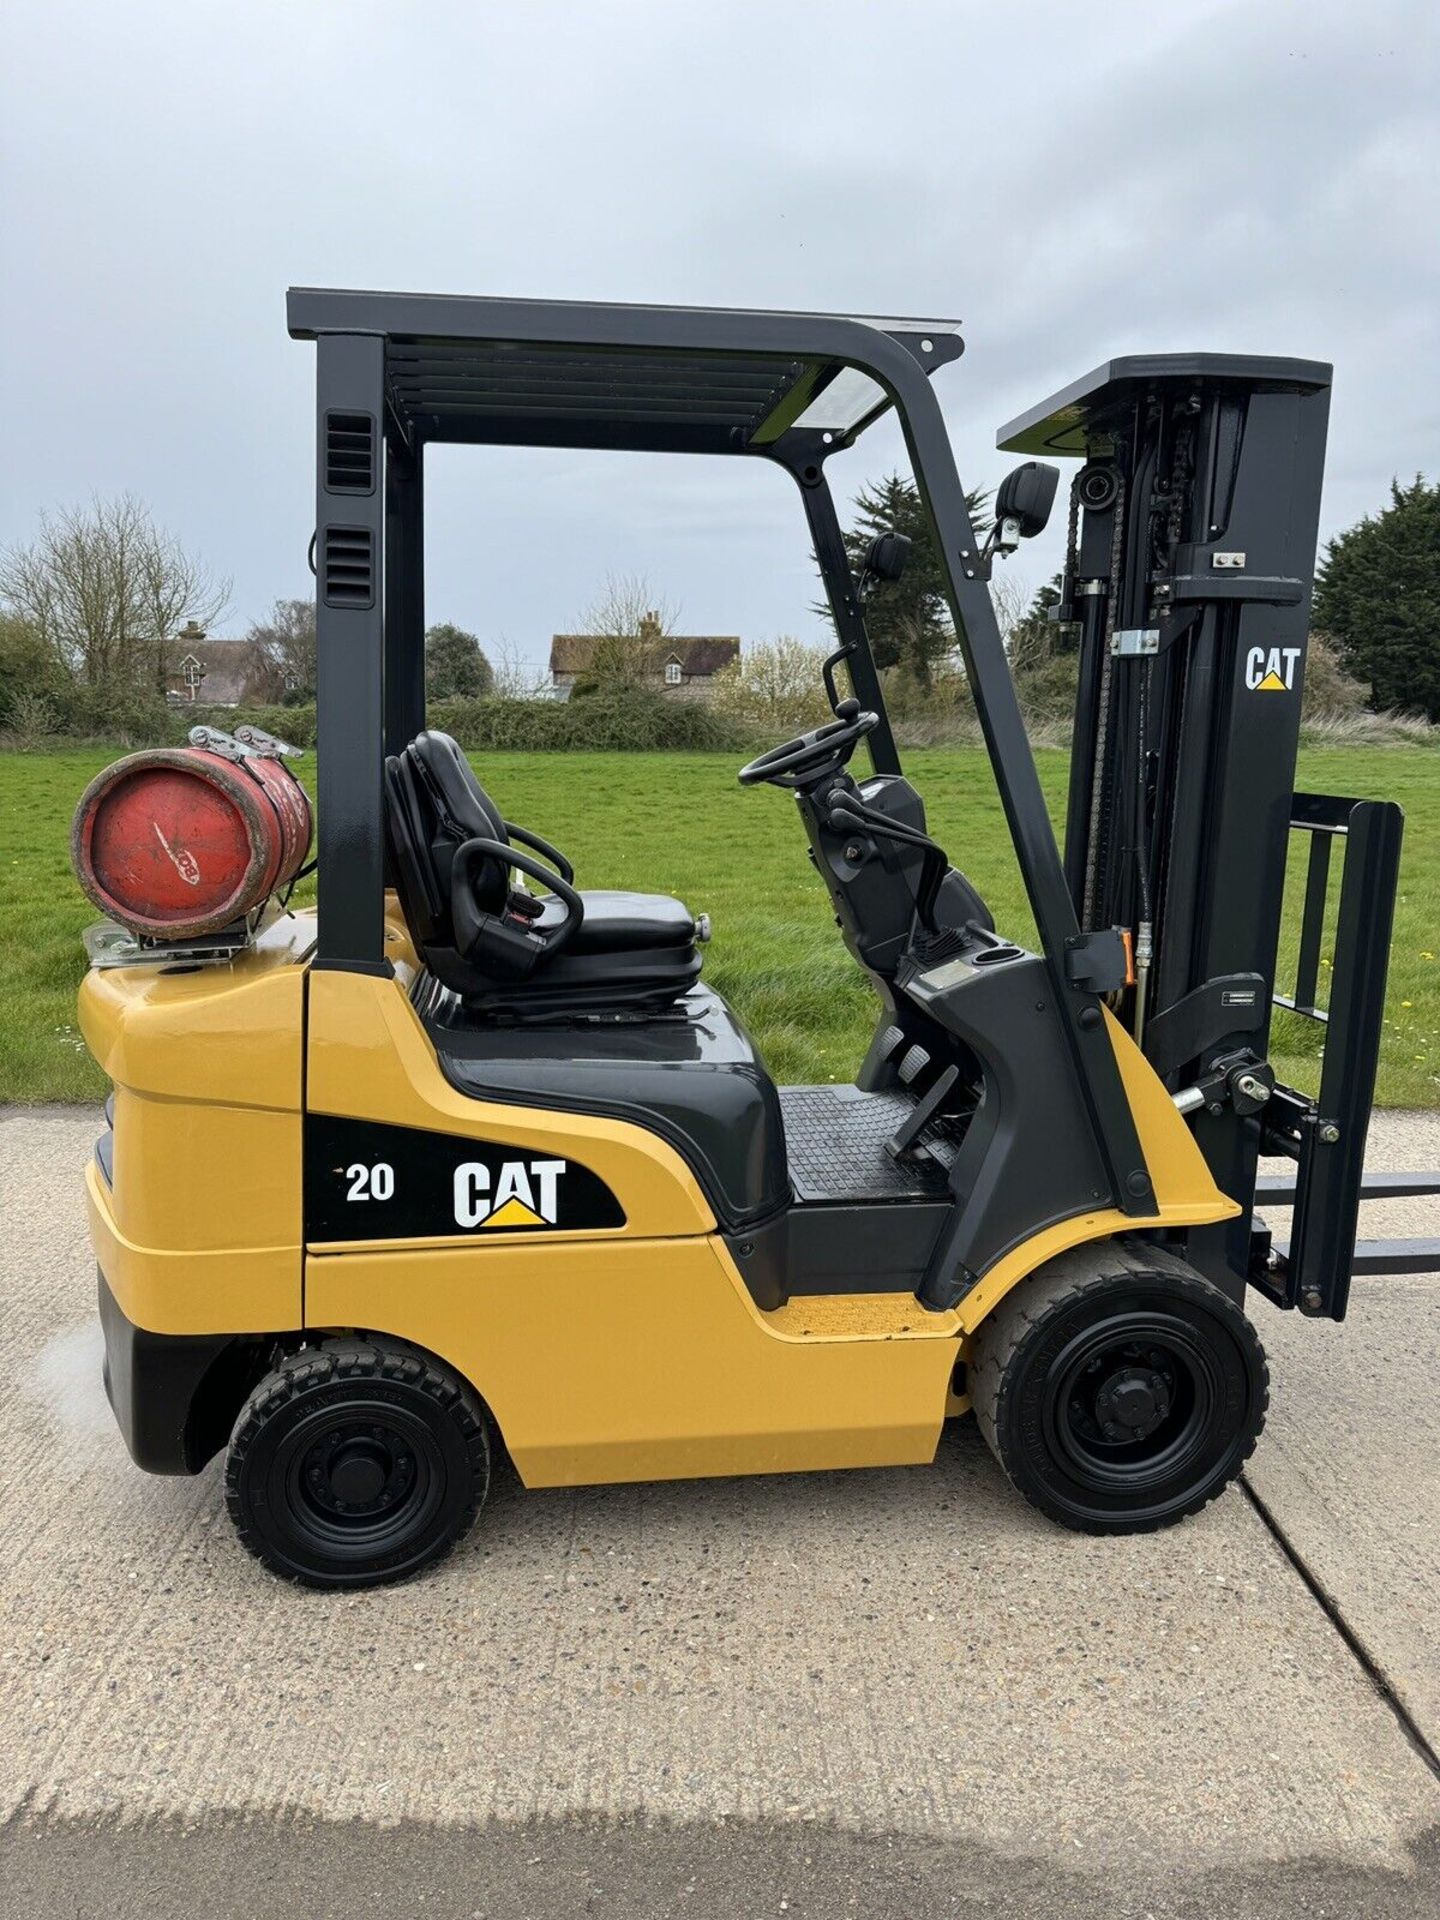 2017, CATERPILLAR - 2 Tonne Gas Forklift (Only 1235 Hours) - Image 4 of 6